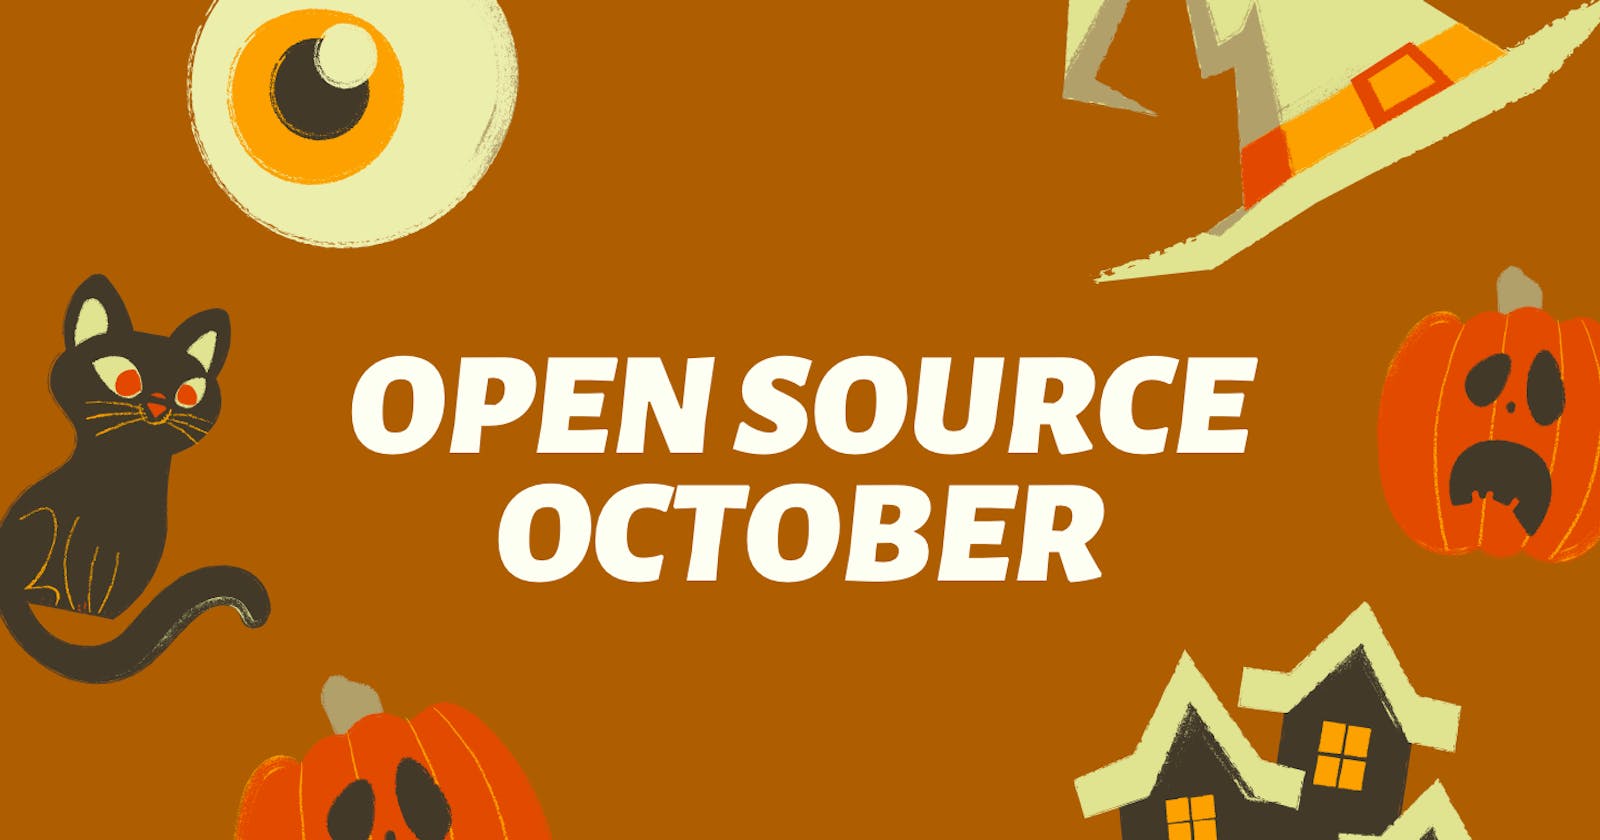 How to contribute to Open Source as a beginner